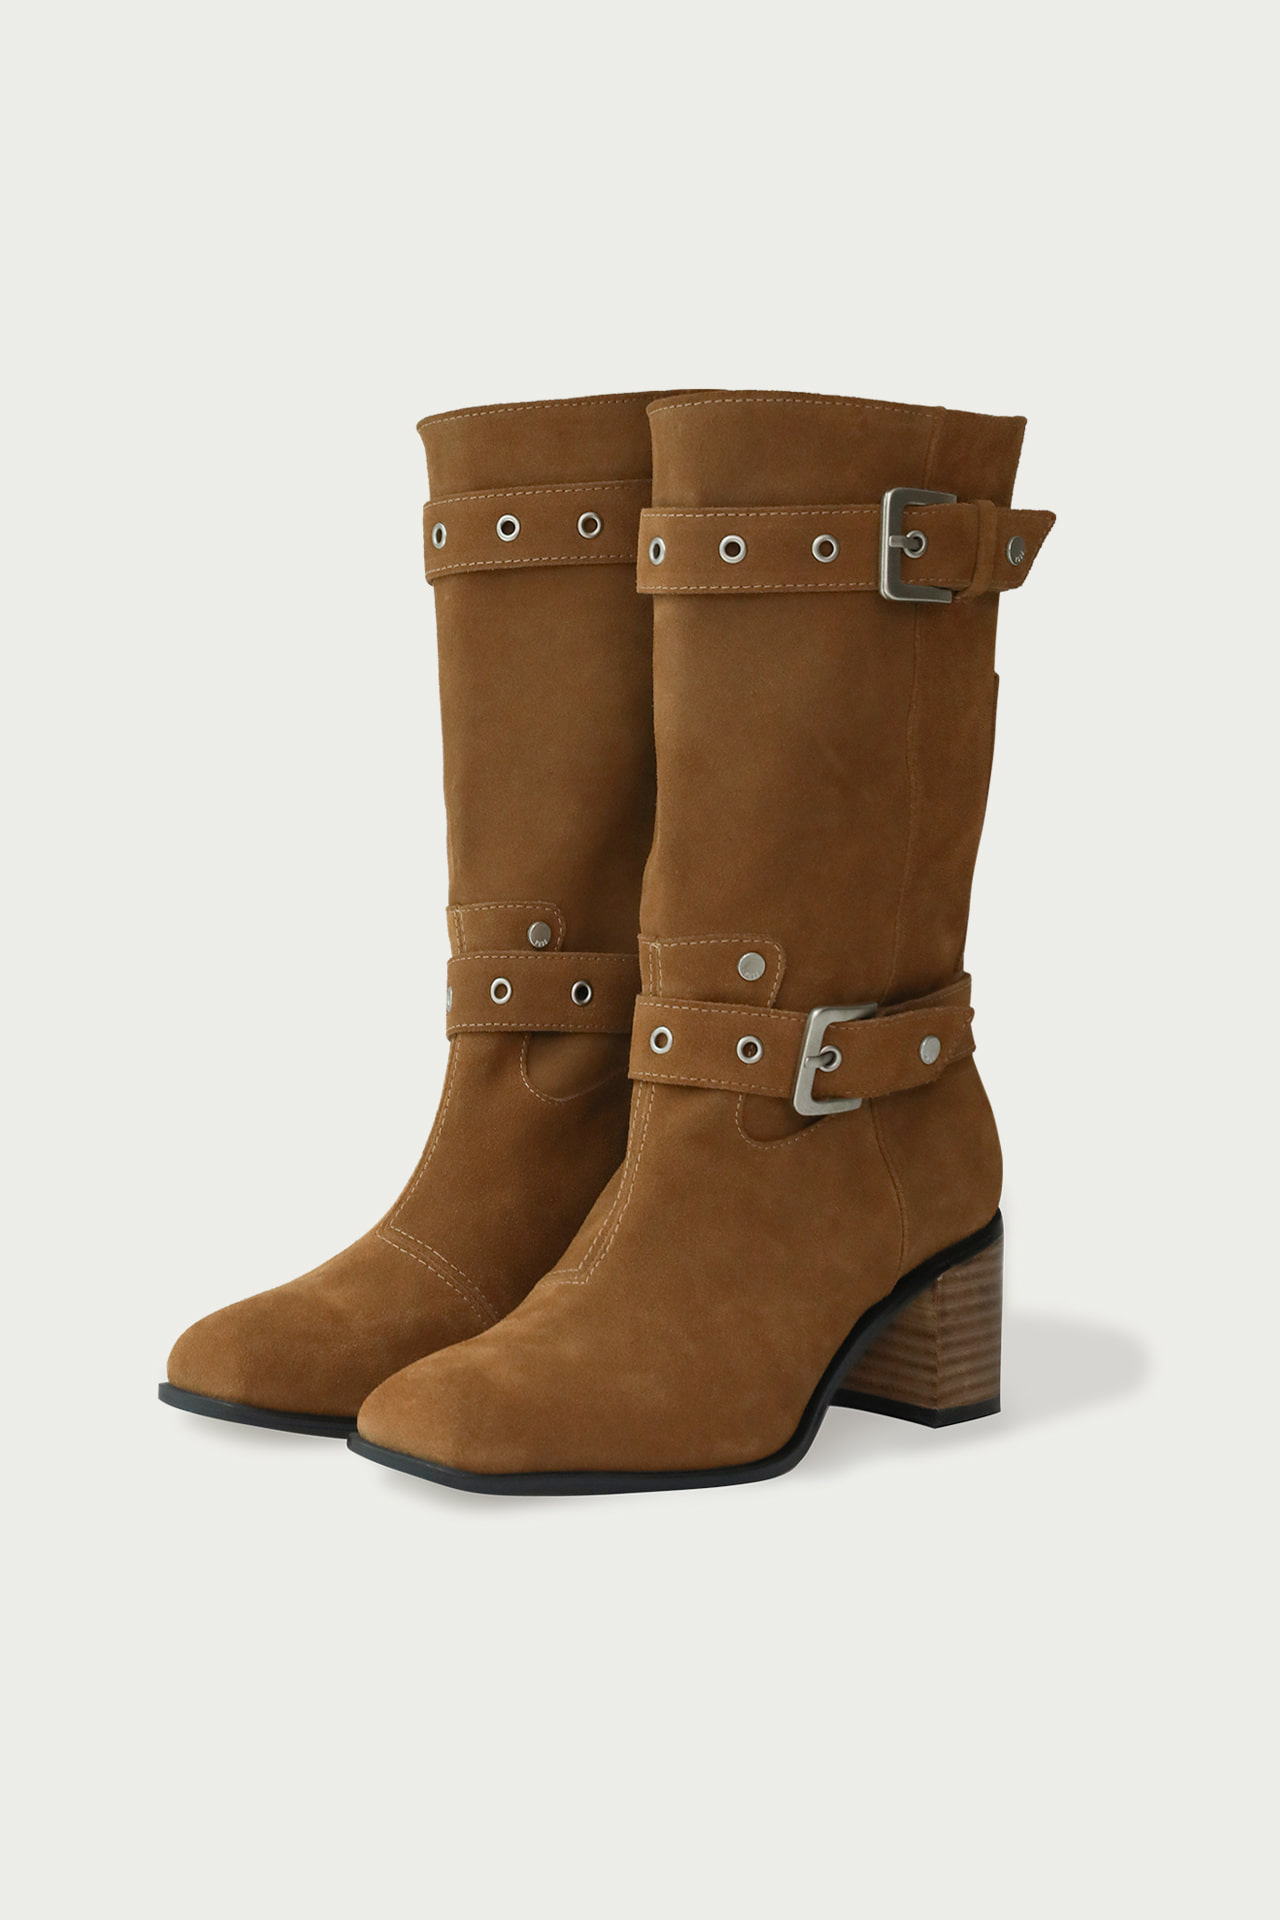 COW HIDE SUEDE BETLED BOOTS - CAMEL